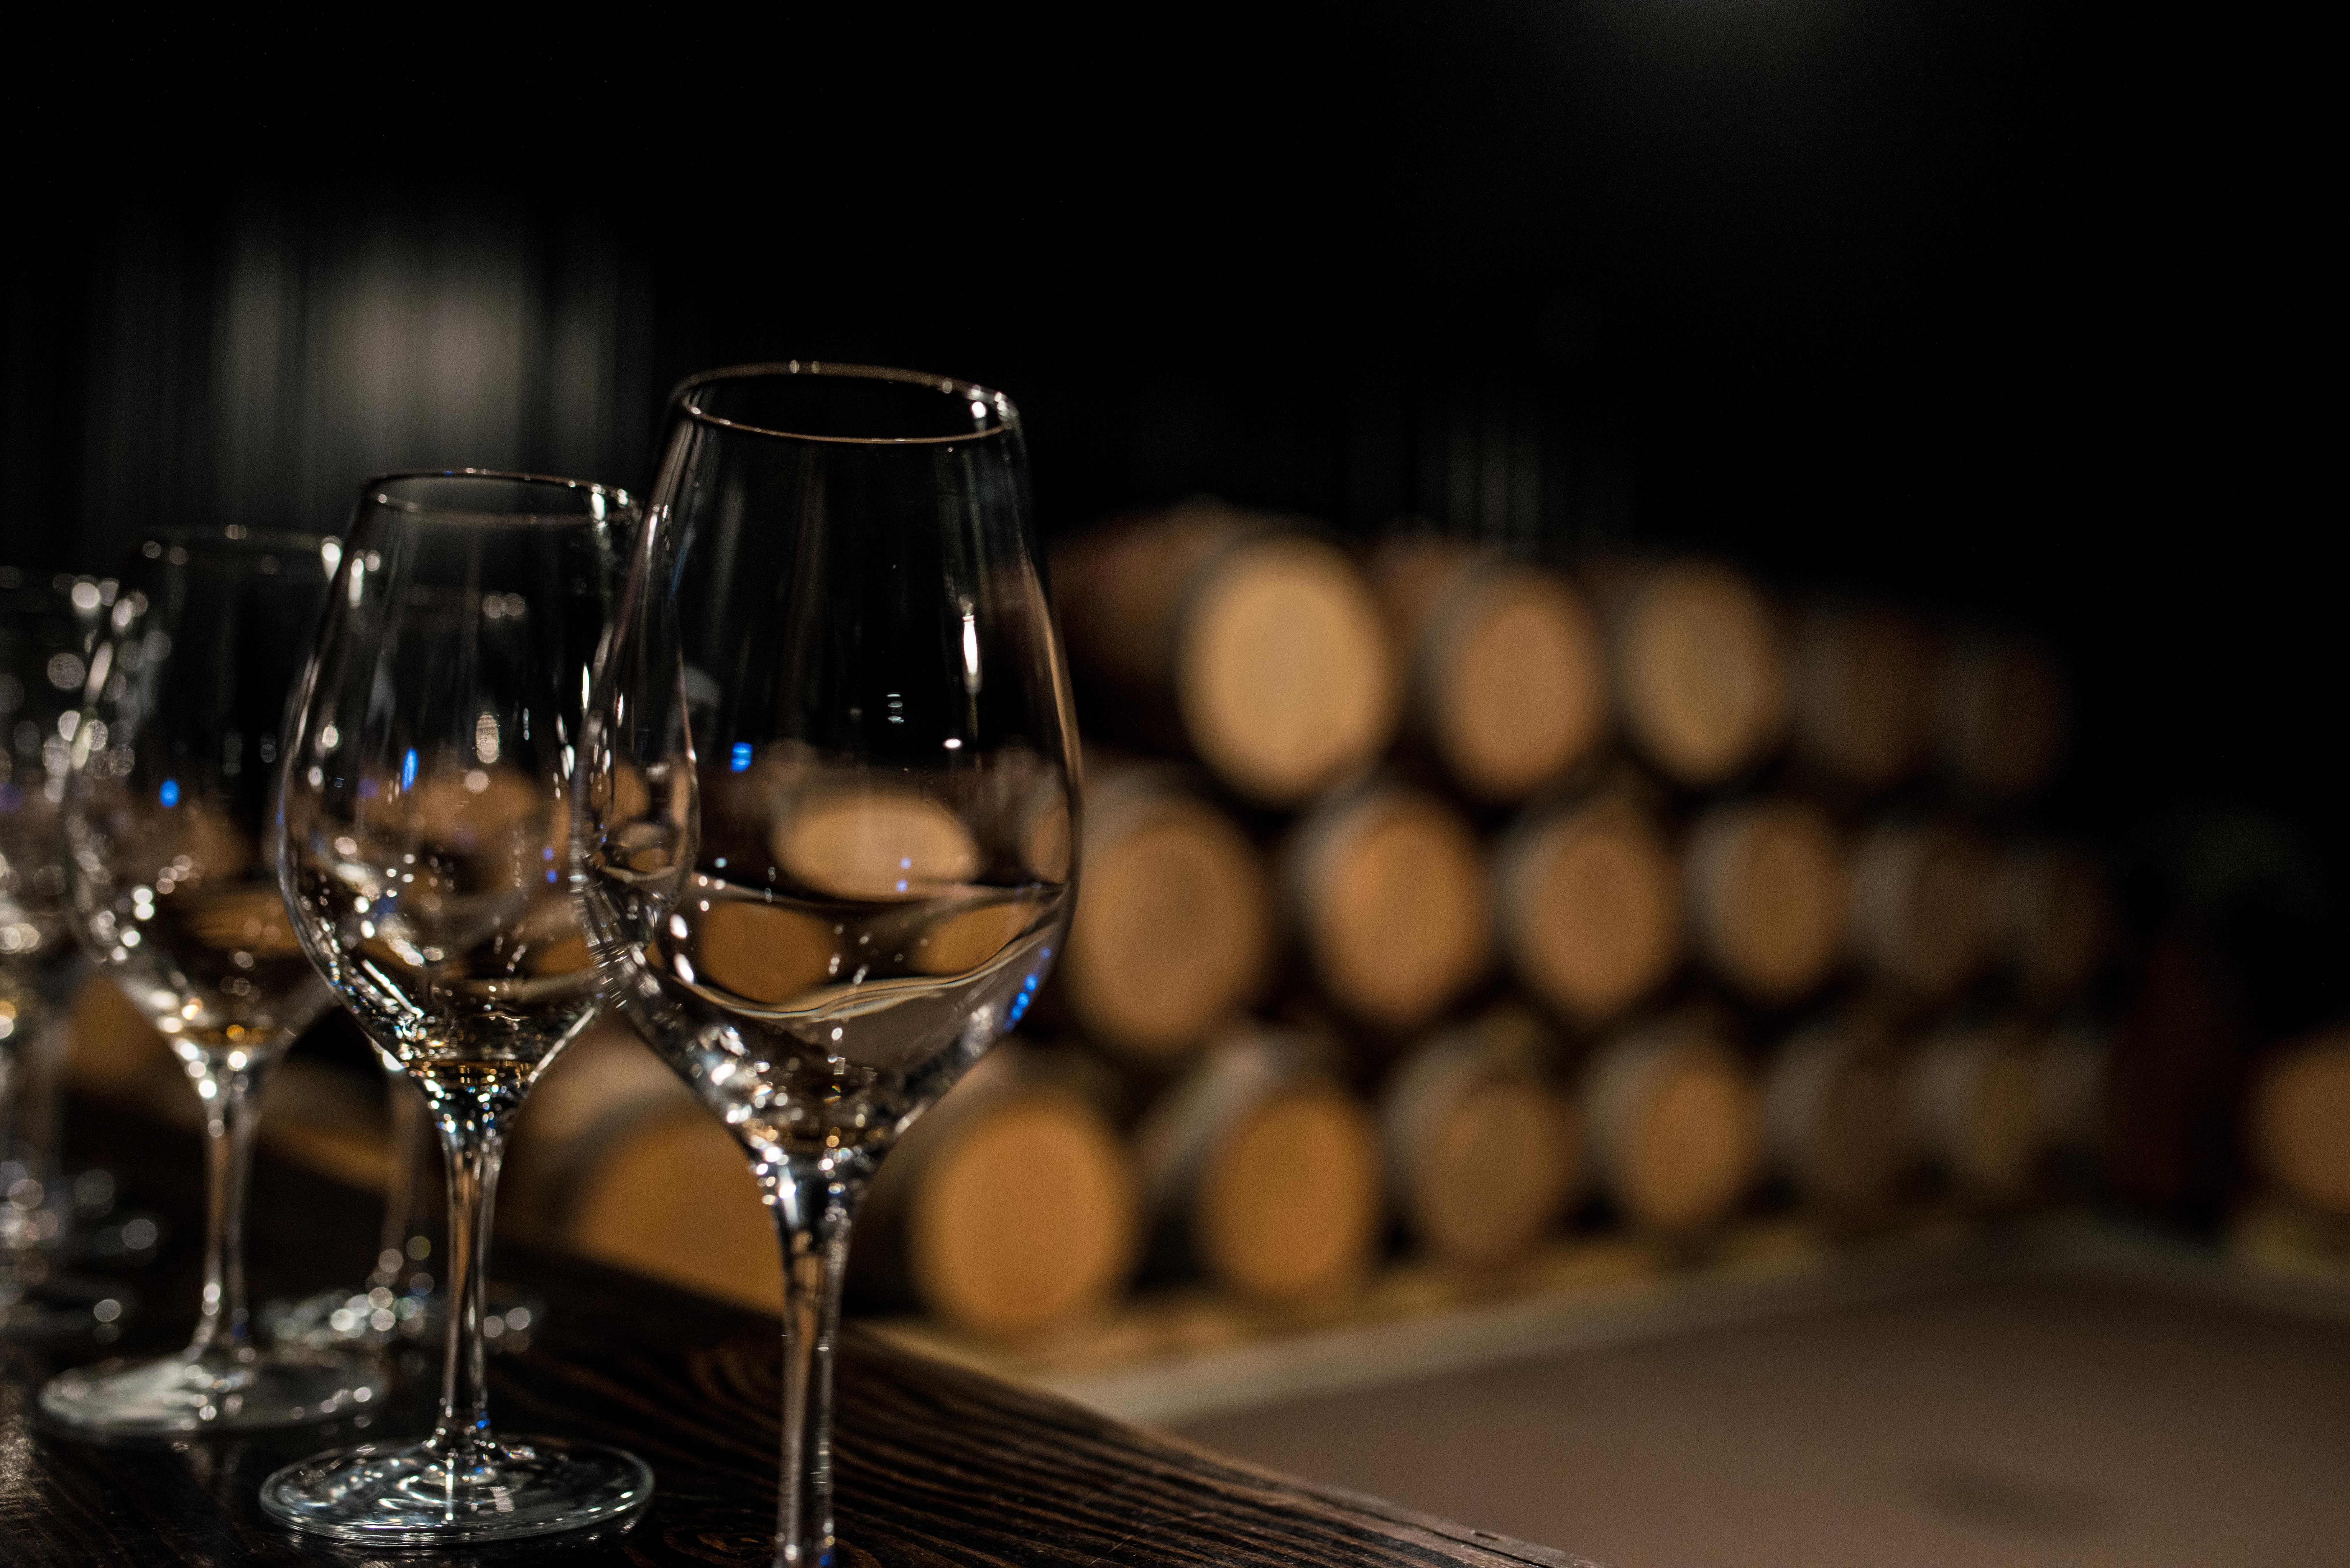 The Black Cellar Room – Where you will enjoy Special Events at Reif